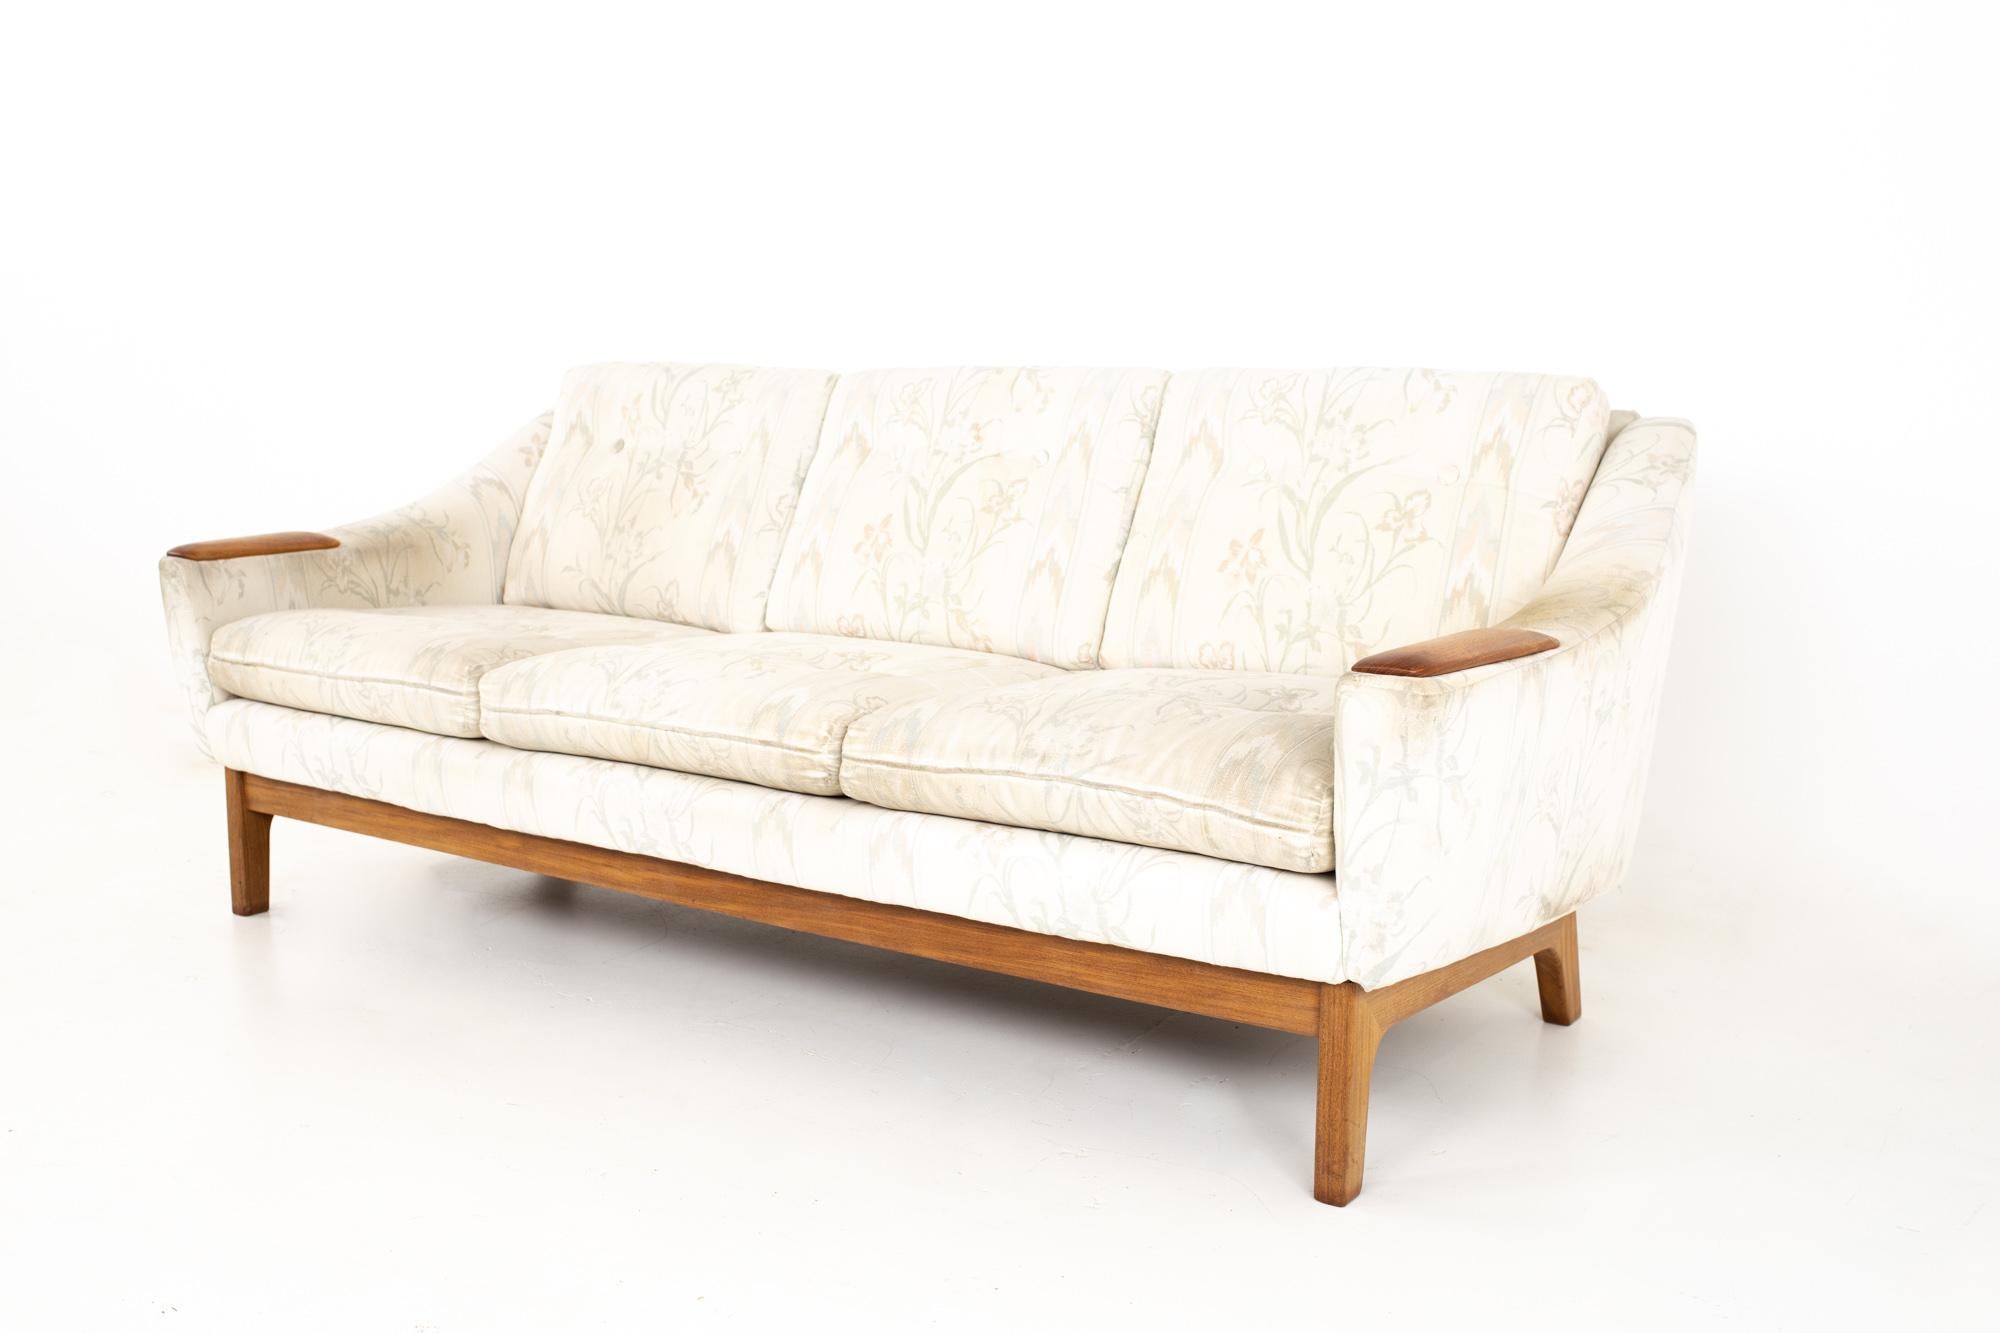 DUX Mid Century teak upholstered sofa
Sofa measures: 75.5 wide x 33 deep x 28.5 high, with a seat height of 17 inches

All pieces of furniture can be had in what we call restored vintage condition. That means the piece is restored upon purchase so